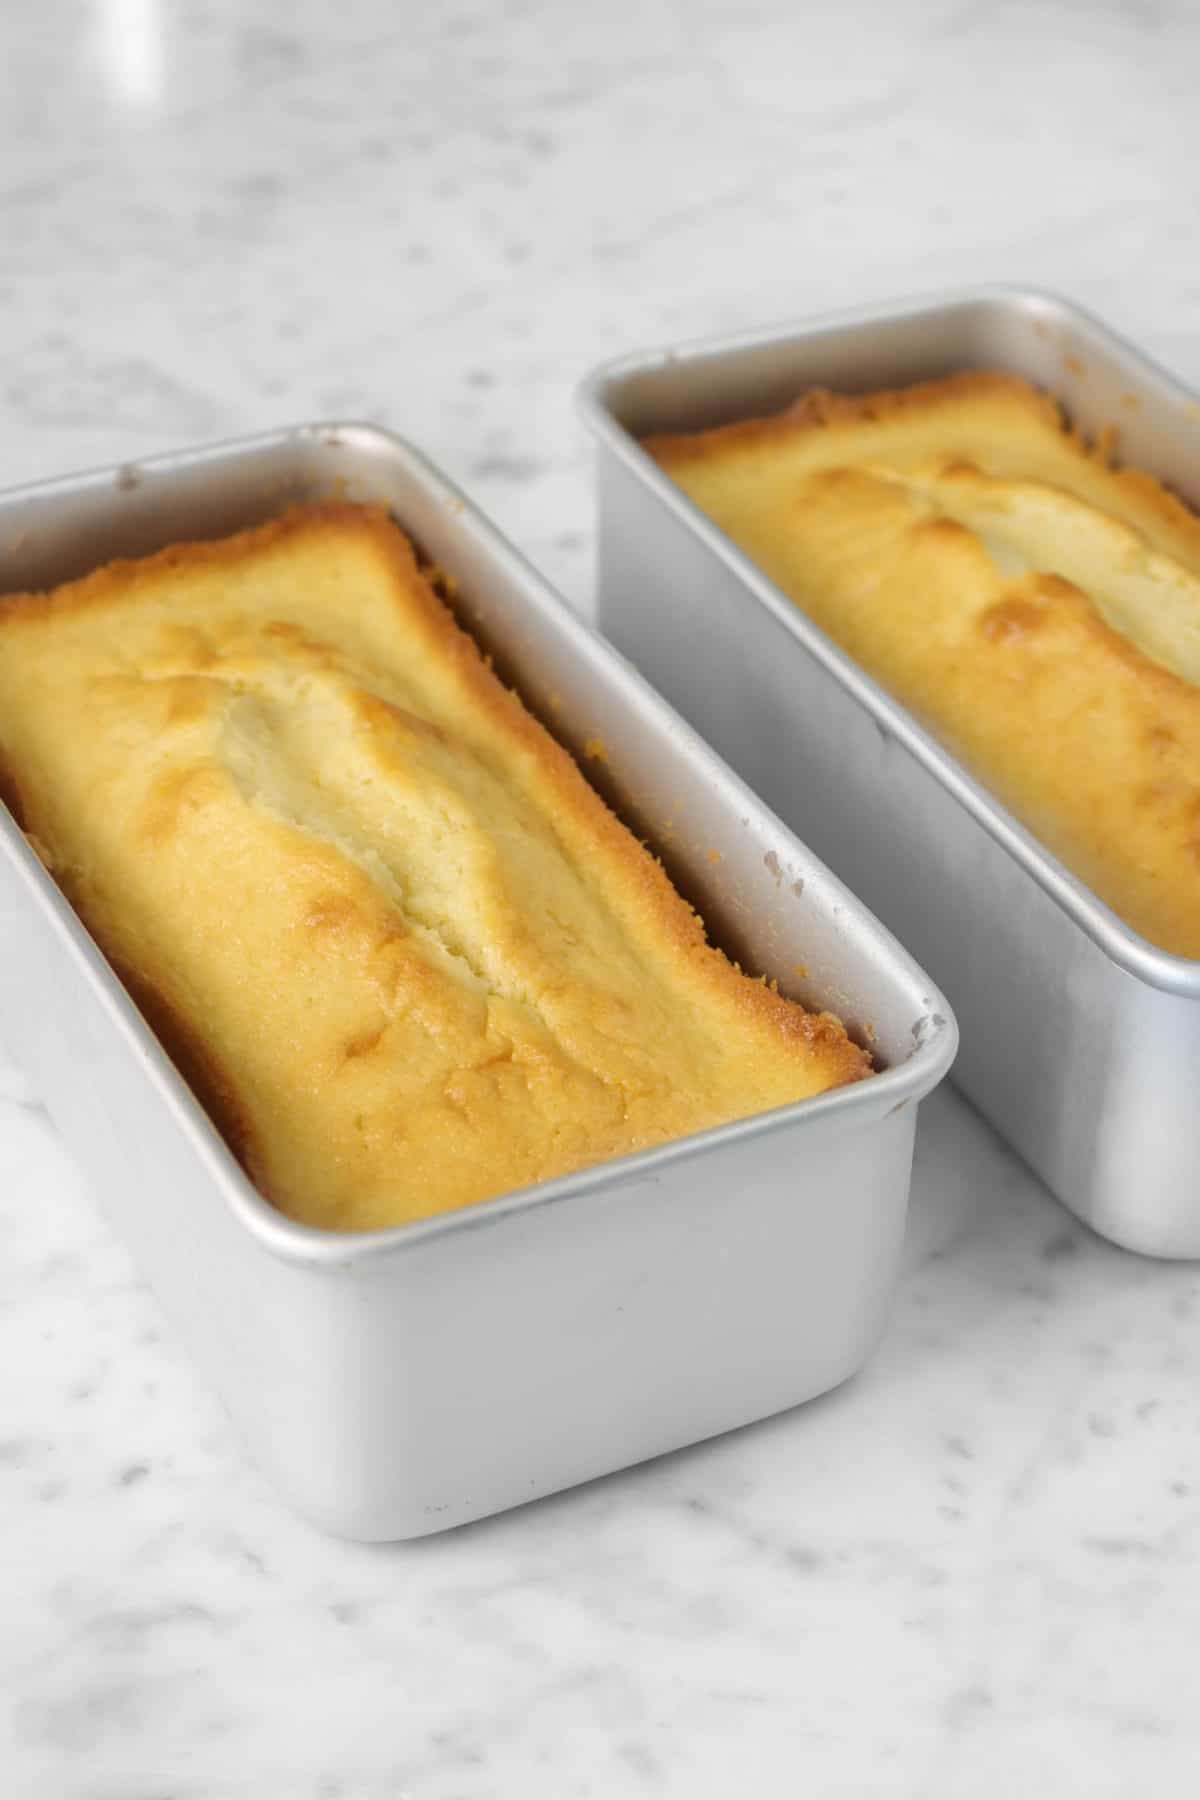 pound cake baked in two loaf pans